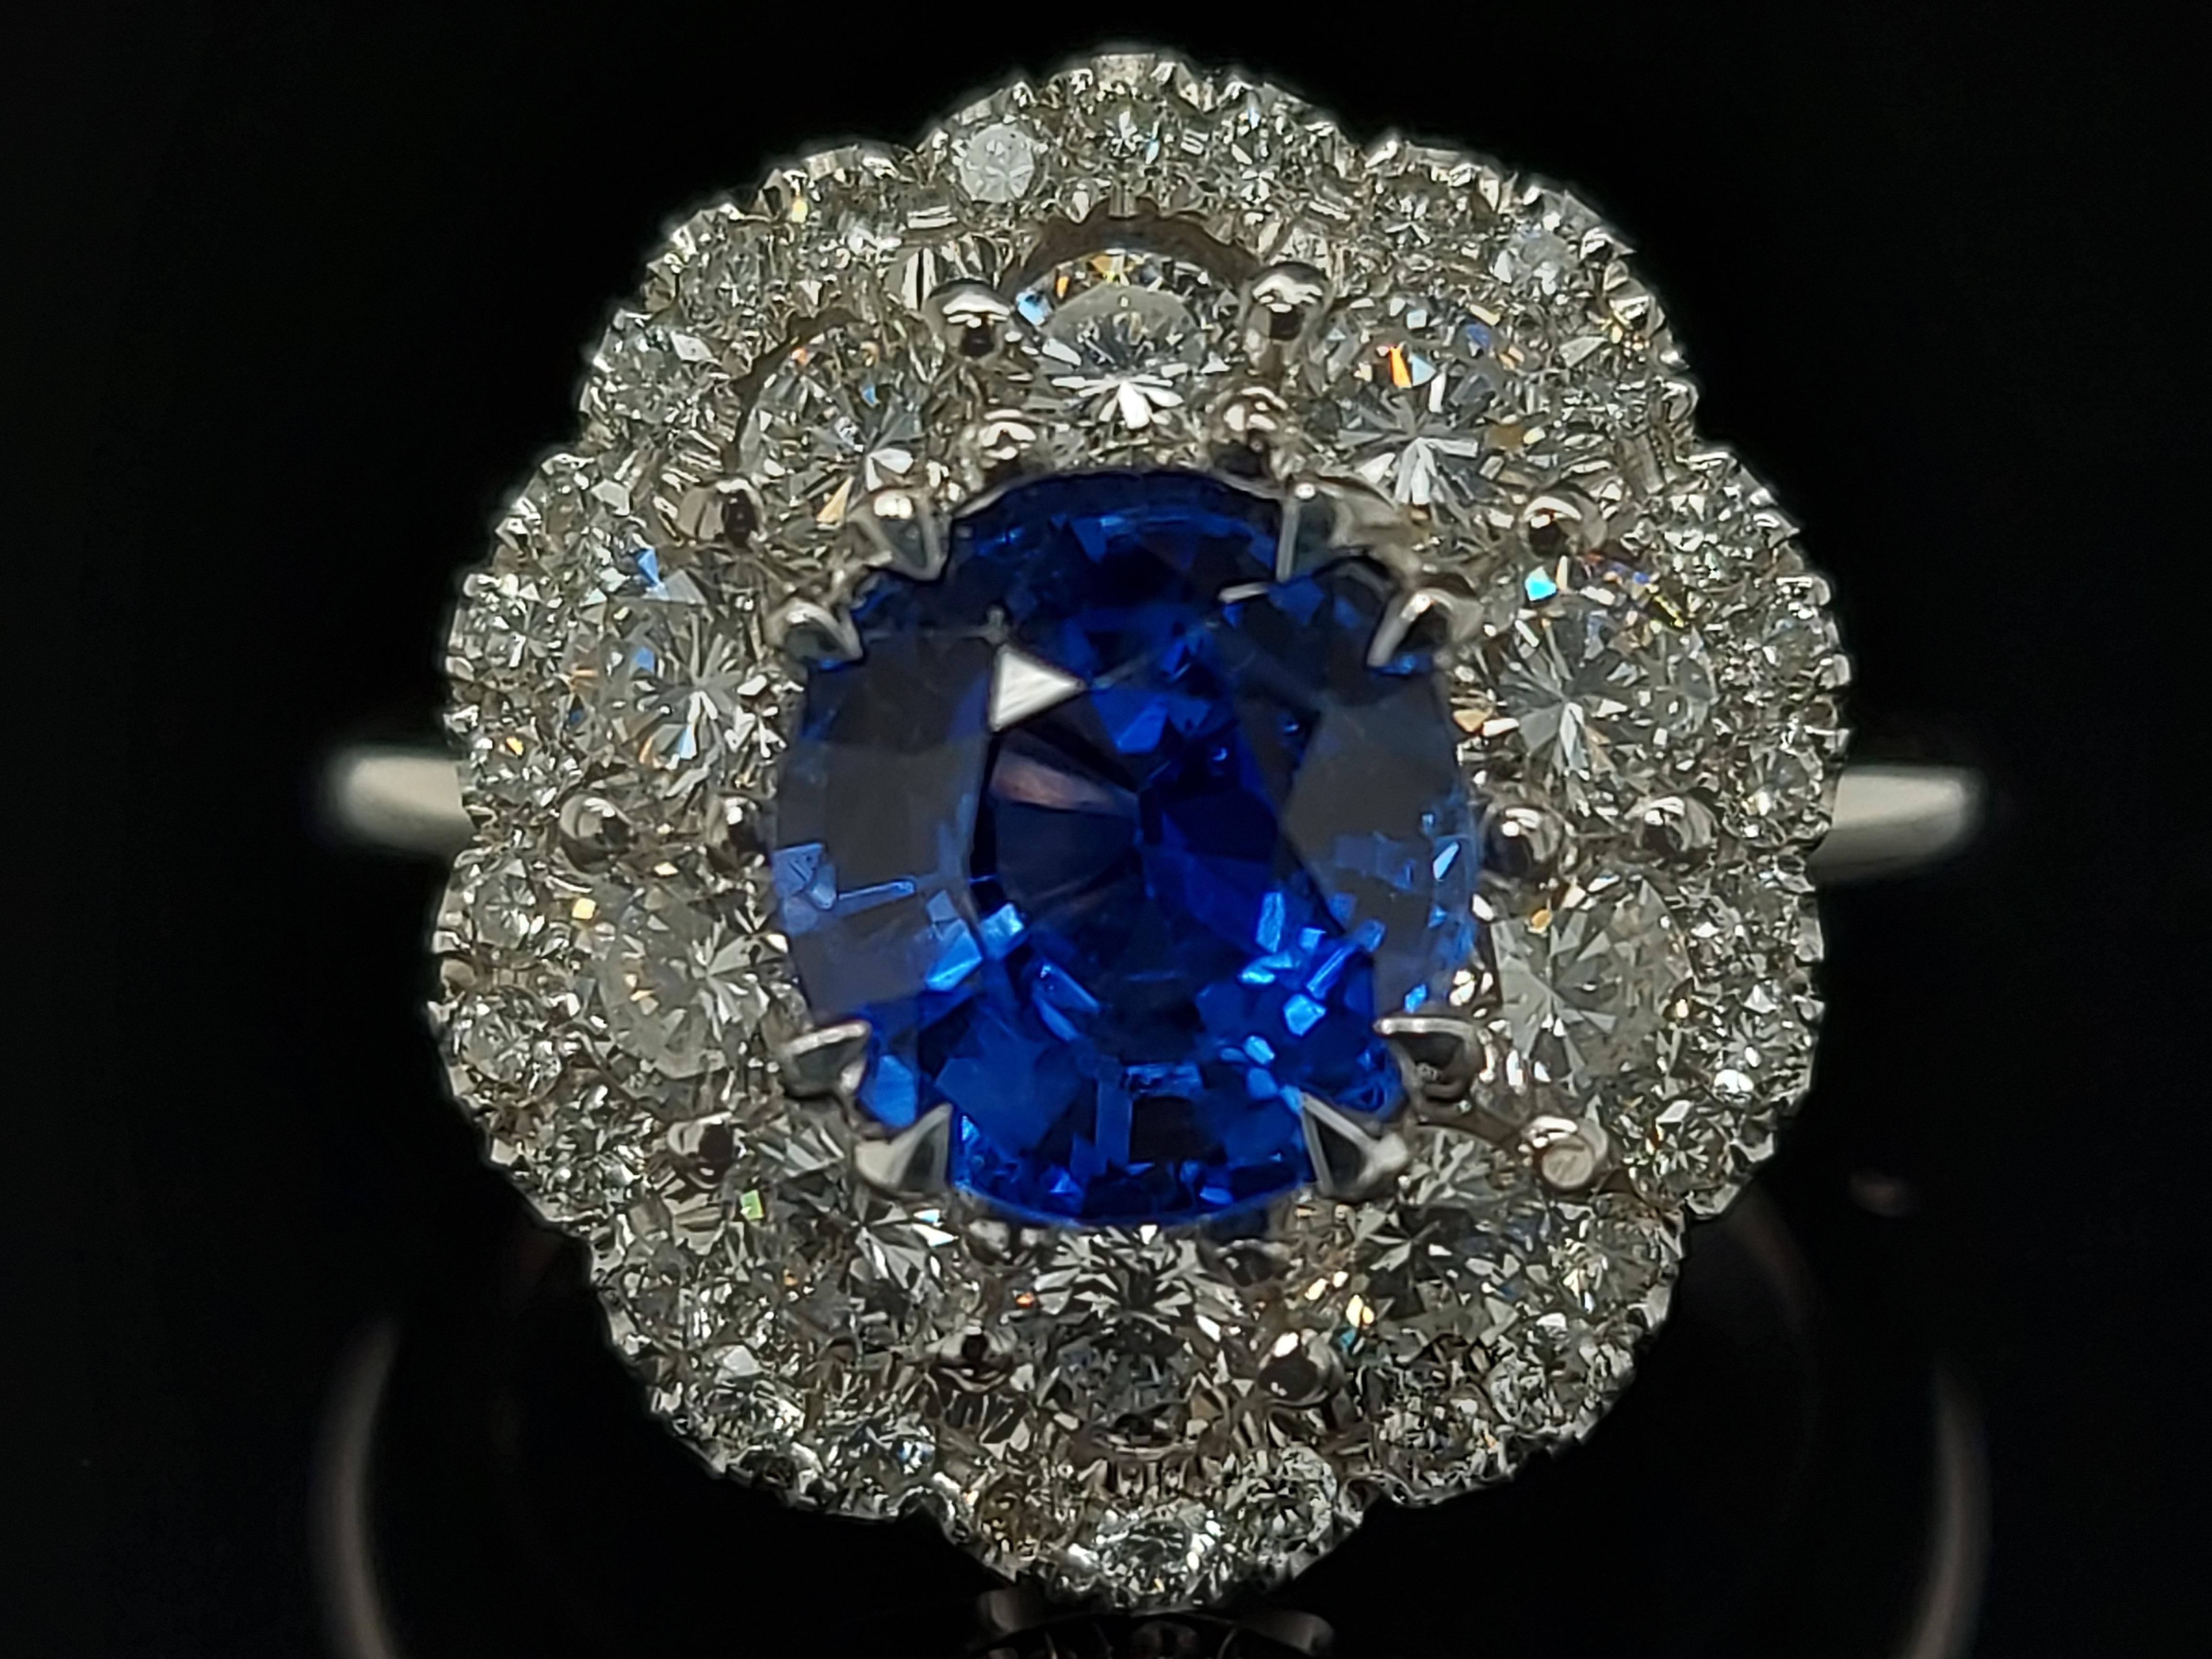 Artisan Exceptional 18 Karat Gold Ring with 2.43 Carat Sapphire and 1.36 Carat Diamonds For Sale